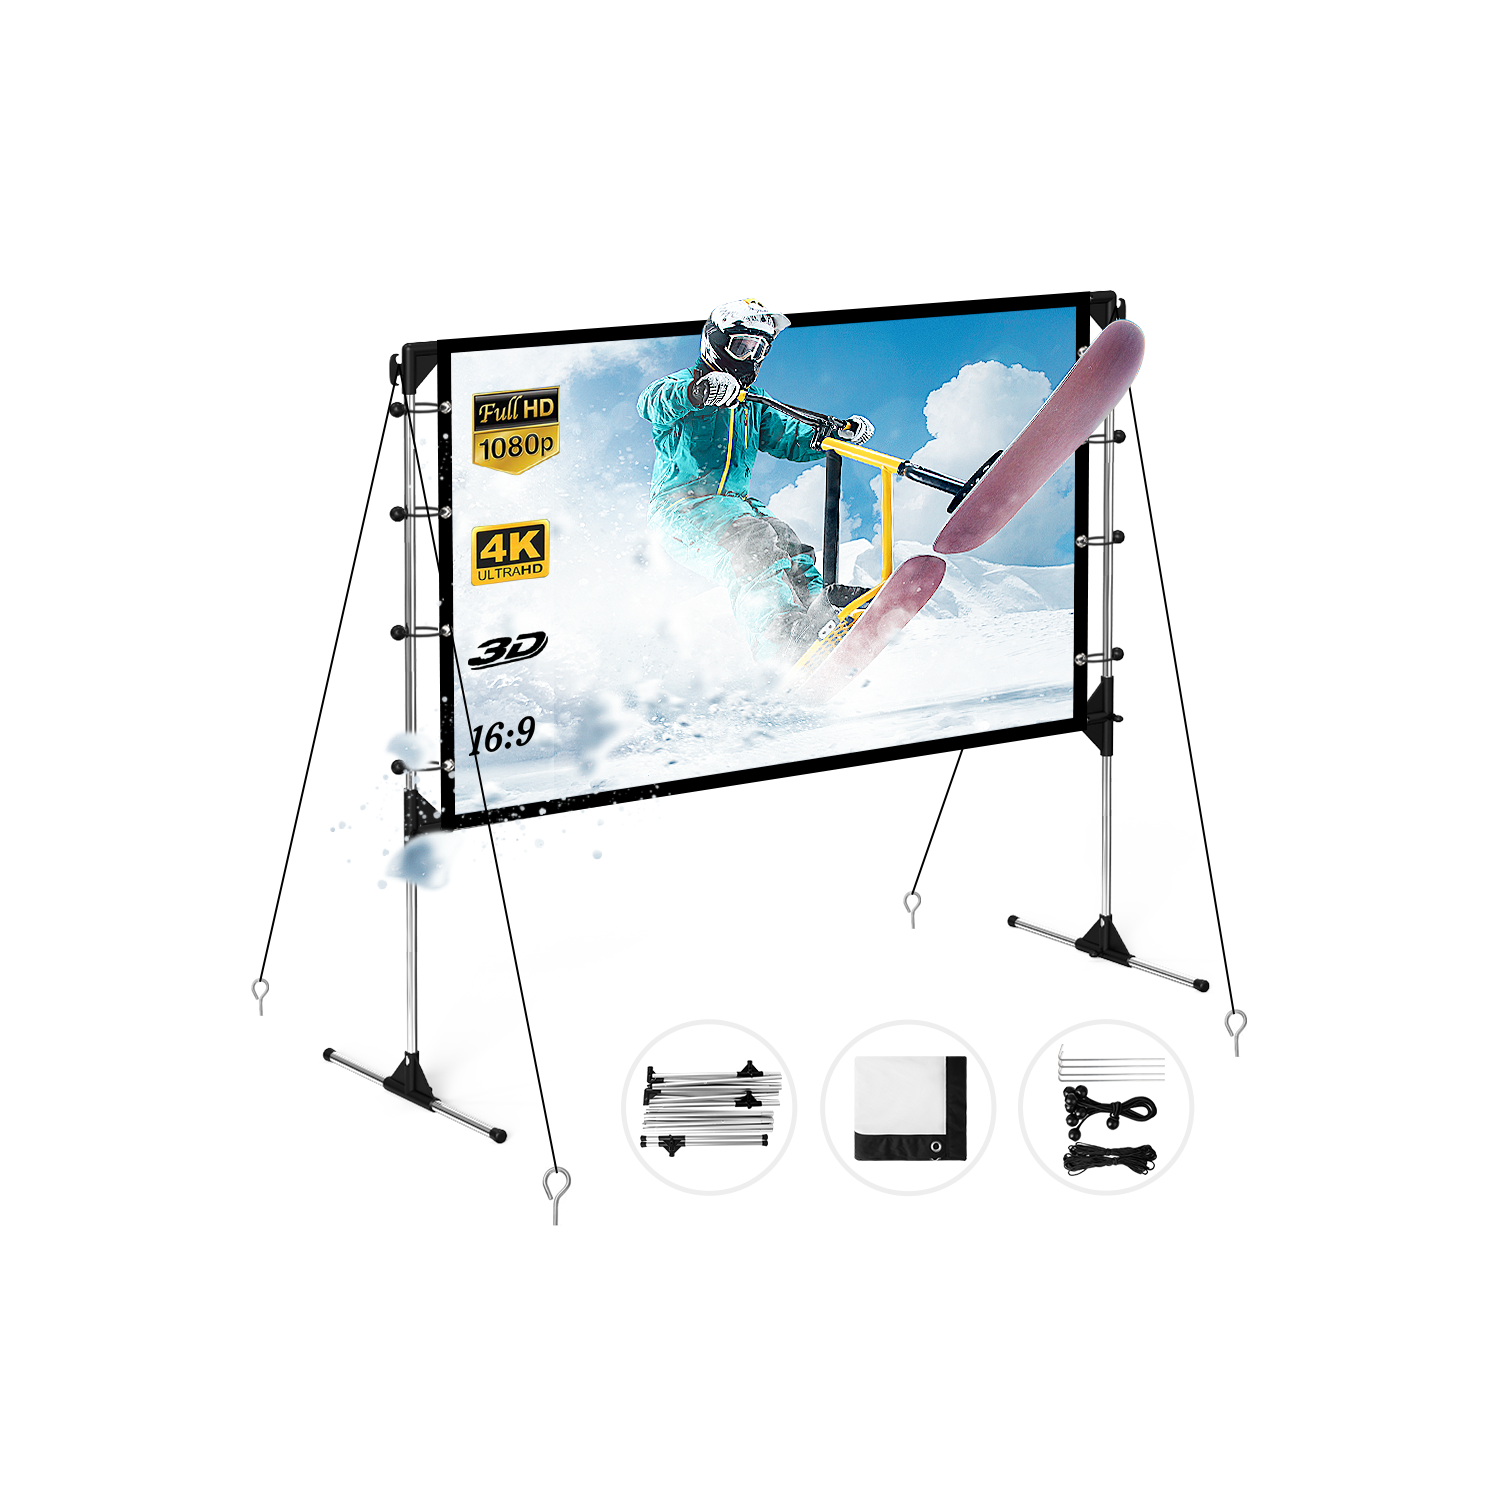 NIERBO Projector Screen with Stand 120inch(278x156cm) 16:9 HD 4K Portable Indoor Outdoor Movie Screen Foldable Outdoor Projection Screens for Office, Home Theater